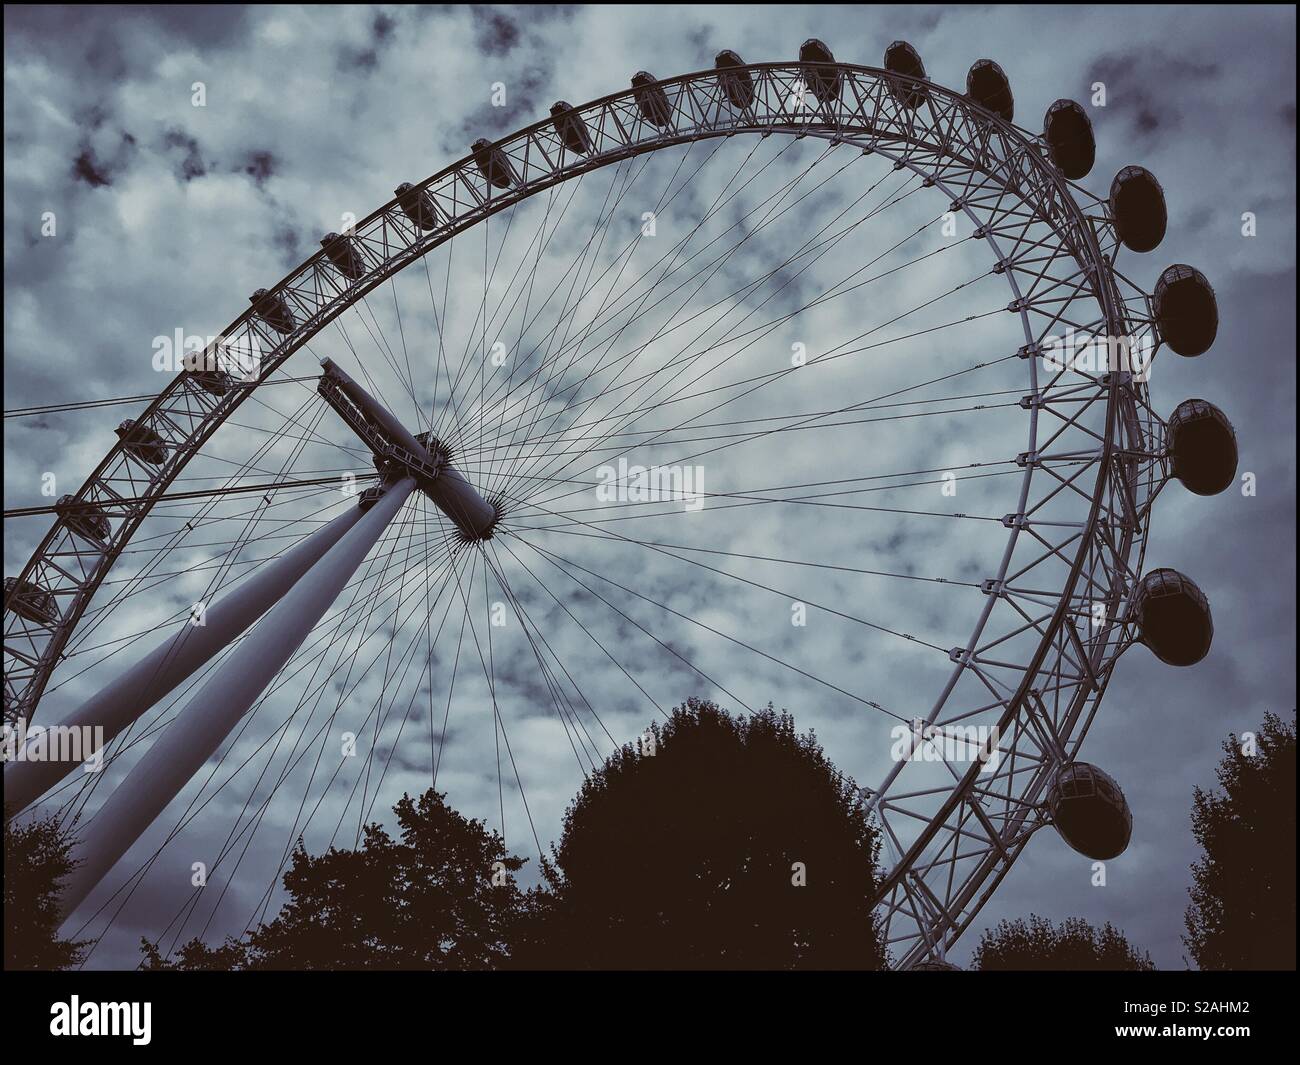 Looking up at the Coca-Cola London Eye, previously know as the British Airways Millennium Wheel. This 32 pod rotating Ferris Wheel is one of England’s most famous tourist attractions. © COLIN HOSKINS. Stock Photo